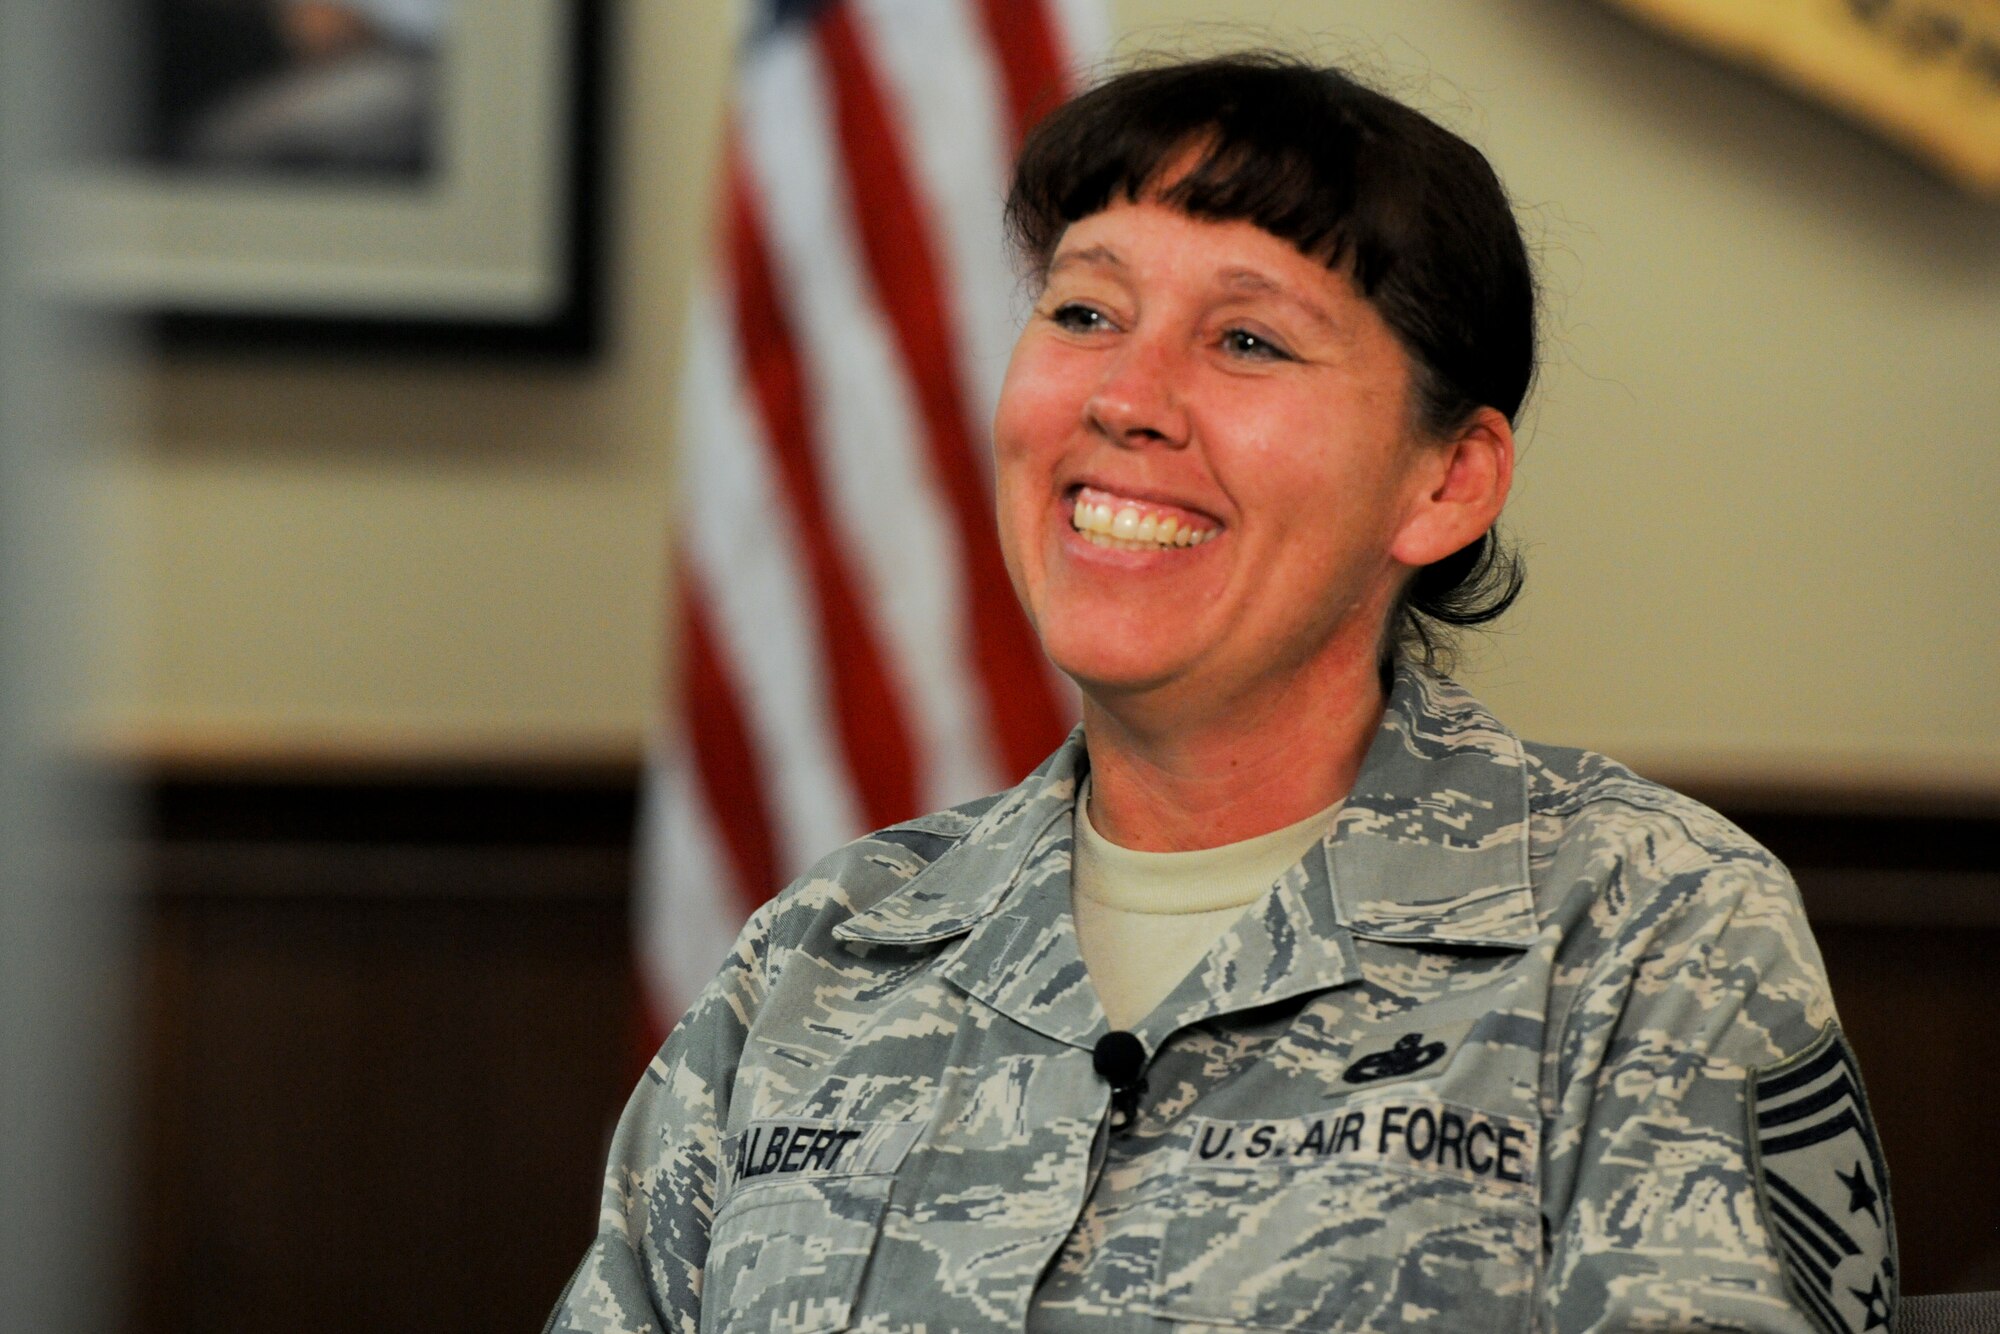 VANDENBERG AIR FORCE BASE, Calif. -- Chief Master Sgt. Suzanne Talbert, 30th Space Wing command chief, speaks about her vision for Vandenberg and past assignments here Wednesday, Sept 21, 2011. The Syracuse, N. Y., native spent her last assignment at Misawa Air Base, Japan, and is looking forward to getting started with the next chapter of her career here at Vandenberg. (U.S. Air Force/Staff Sgt. Levi Riendeau)